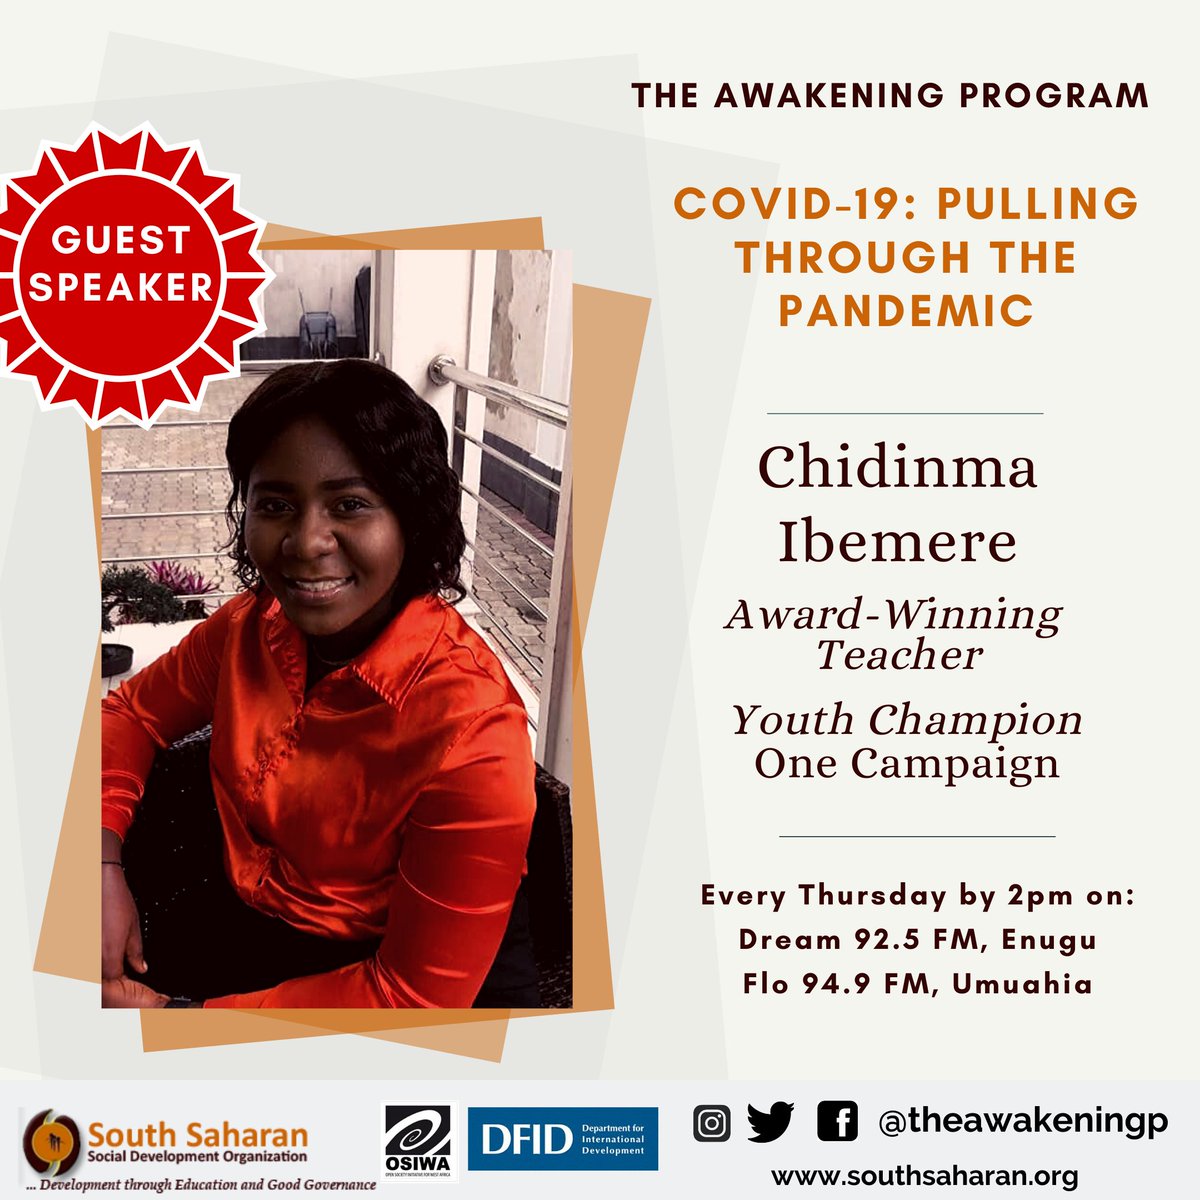 On this week’s Awakening broadcast, we will look at the effects of the lockdown on education and possible alternatives to classroom learning.Our guest speaker for today is Chidinma Ibemere, award-winning teacher and youth champion for the ONE Campaign #LockdownAwakening